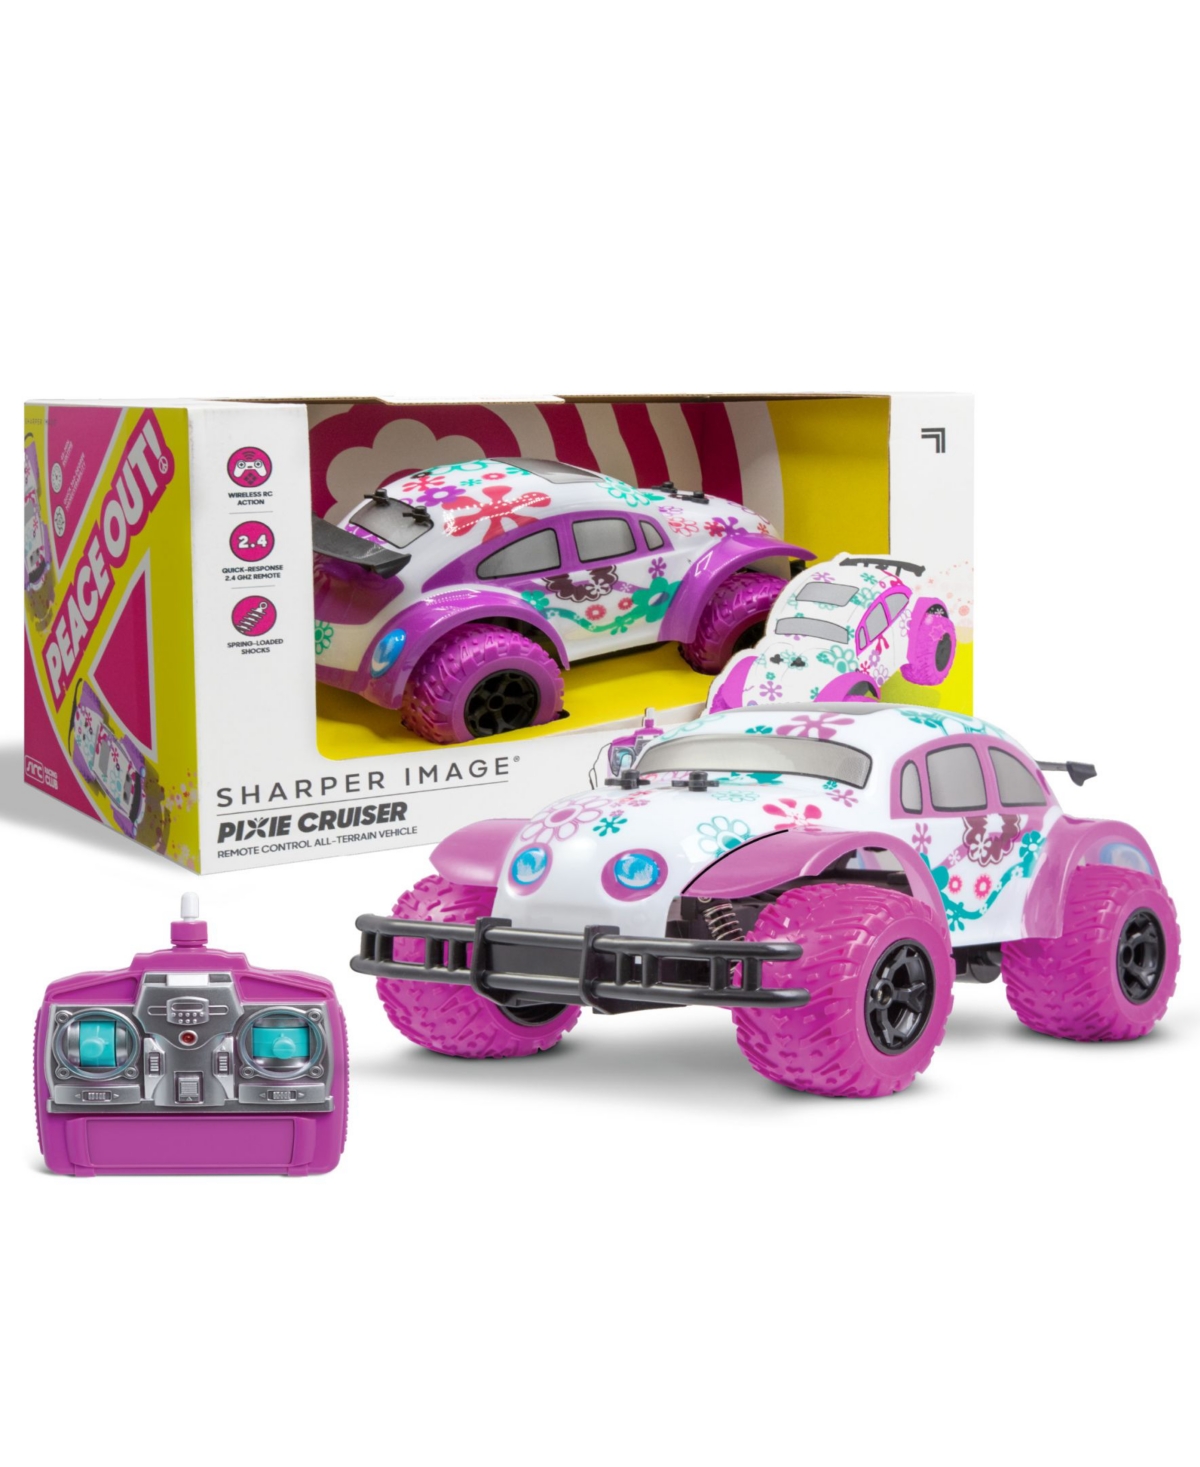 Sharper Image Babies' Toy Rc Pixie Cruiser In Pink